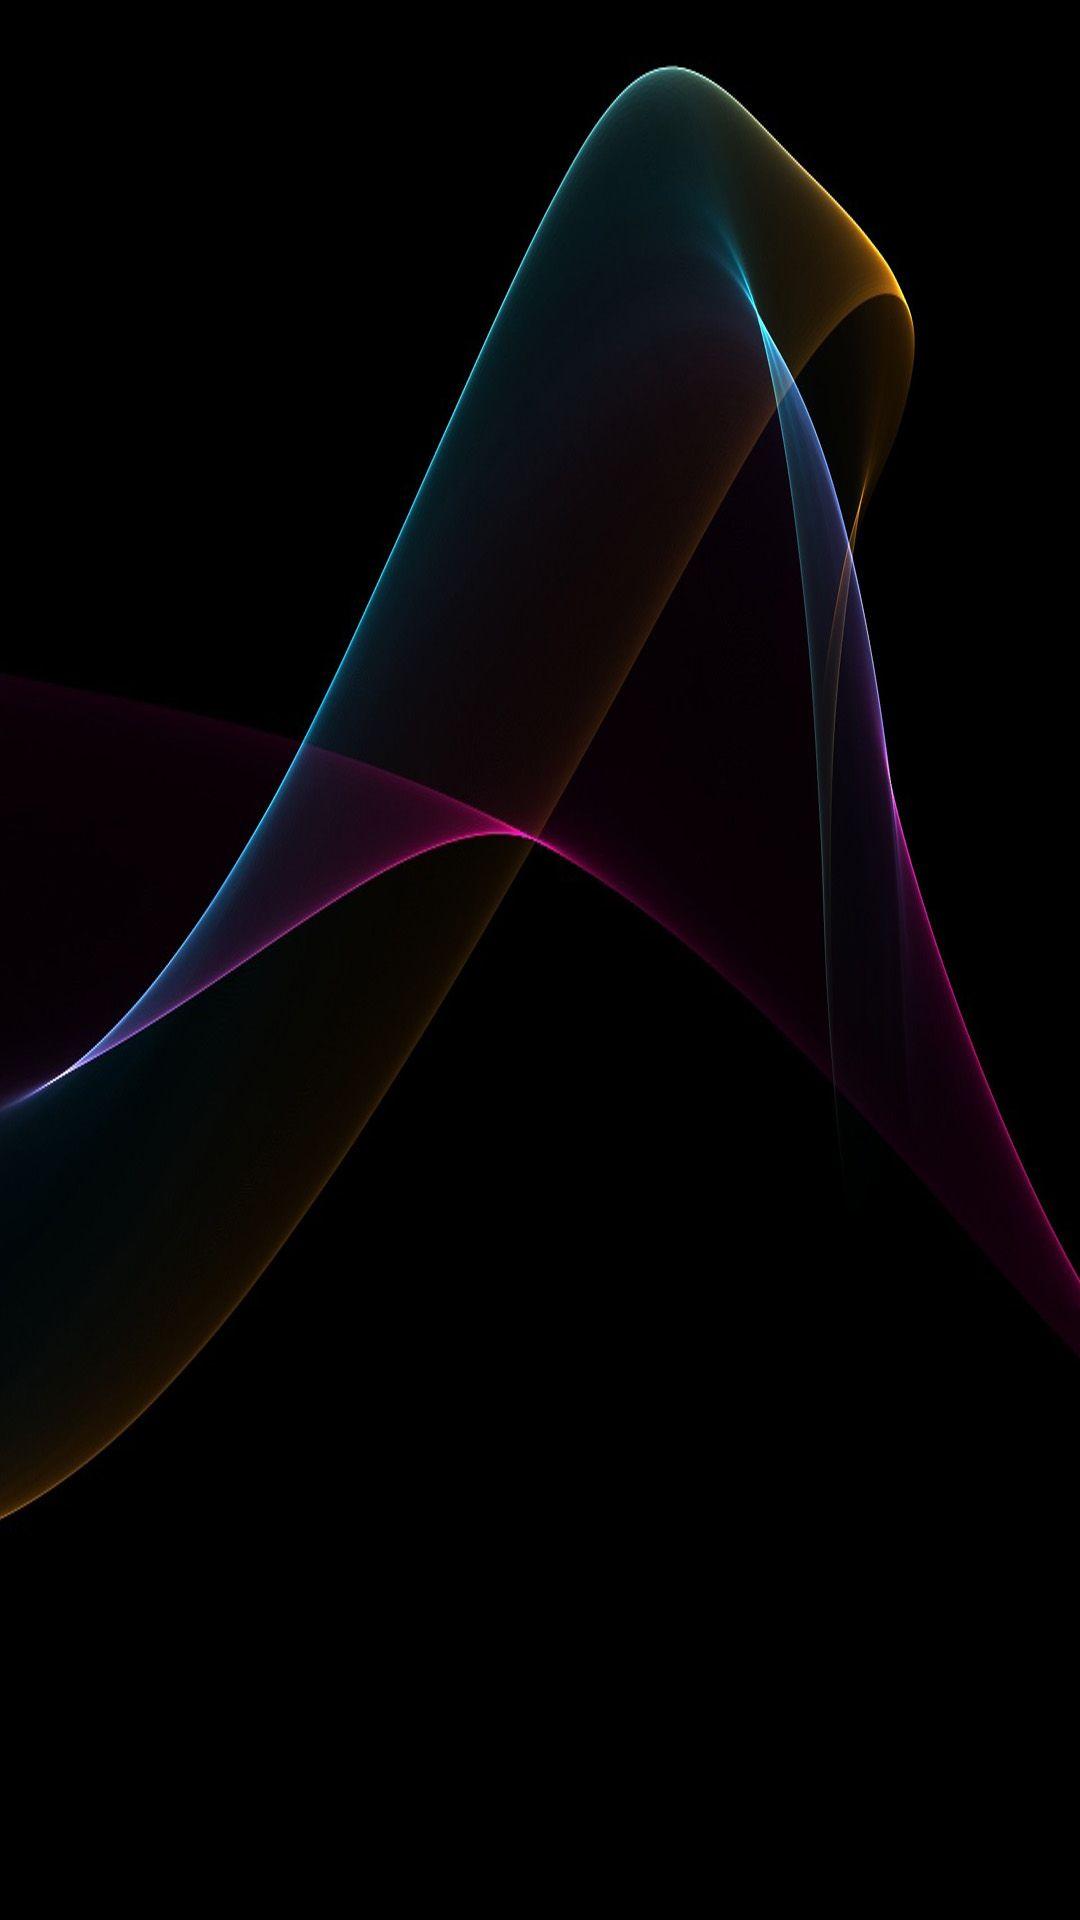 Abstract Hd Wallpaper For Android | Pictures prince